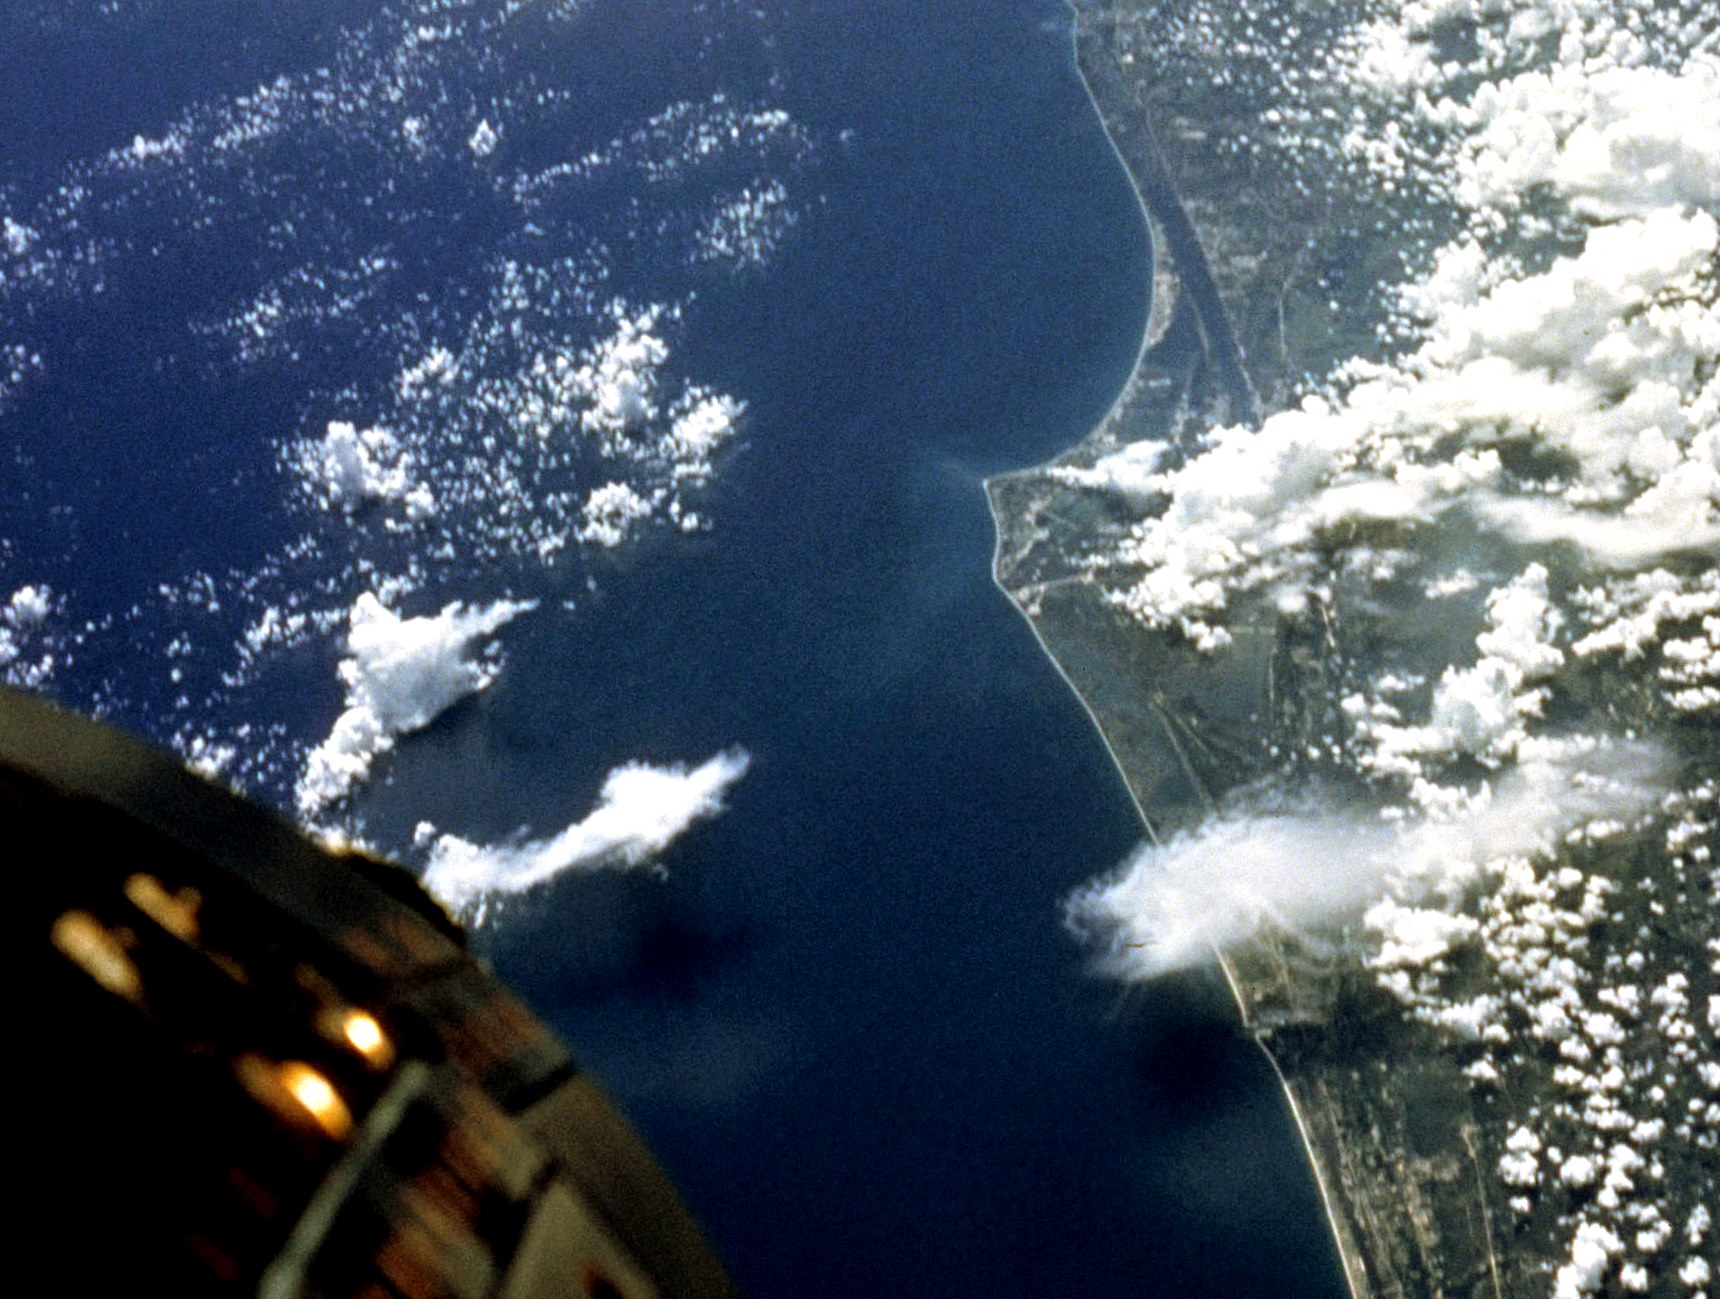 view from space of East Central Florida The nose of the Gemini V spacecrft is in the lower left.